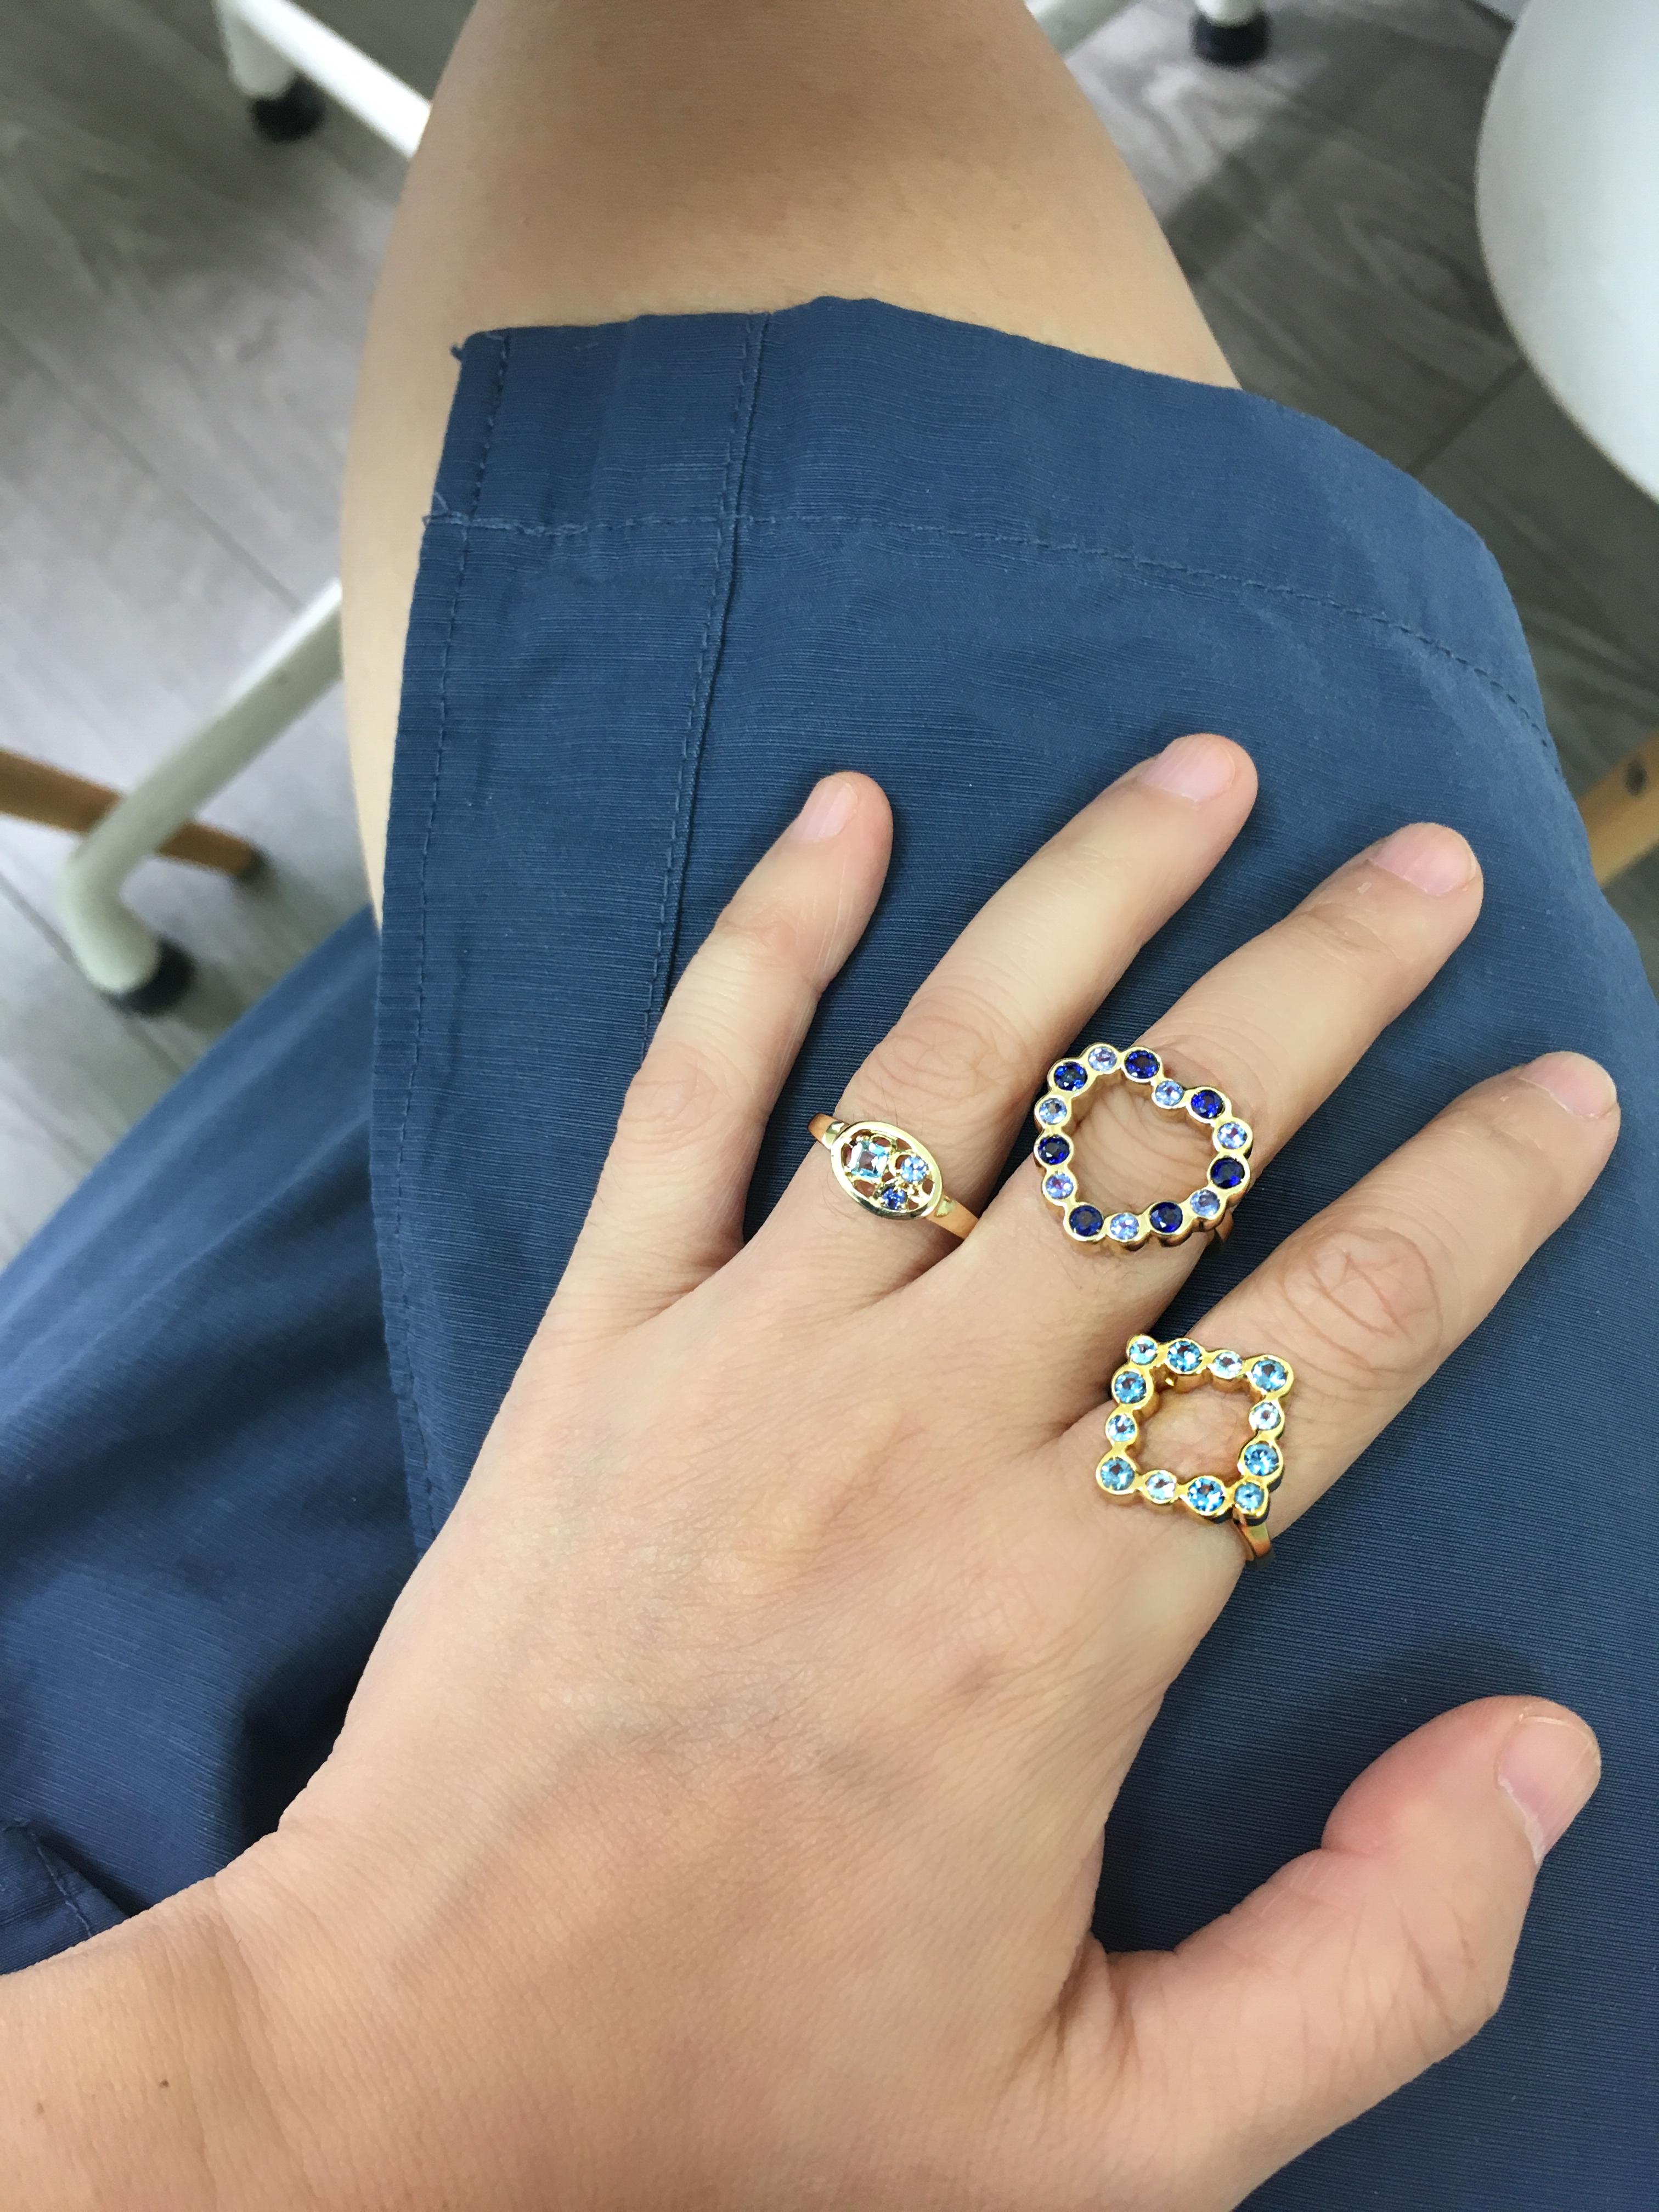 A cluster of an eclectic mix of stones in different shapes captured in an oval
shape. Great for wearing alone or stacking with your favorite stackable rings.
The ring has a tapered ring band for a comfortable fit.

Inspired by seeing the